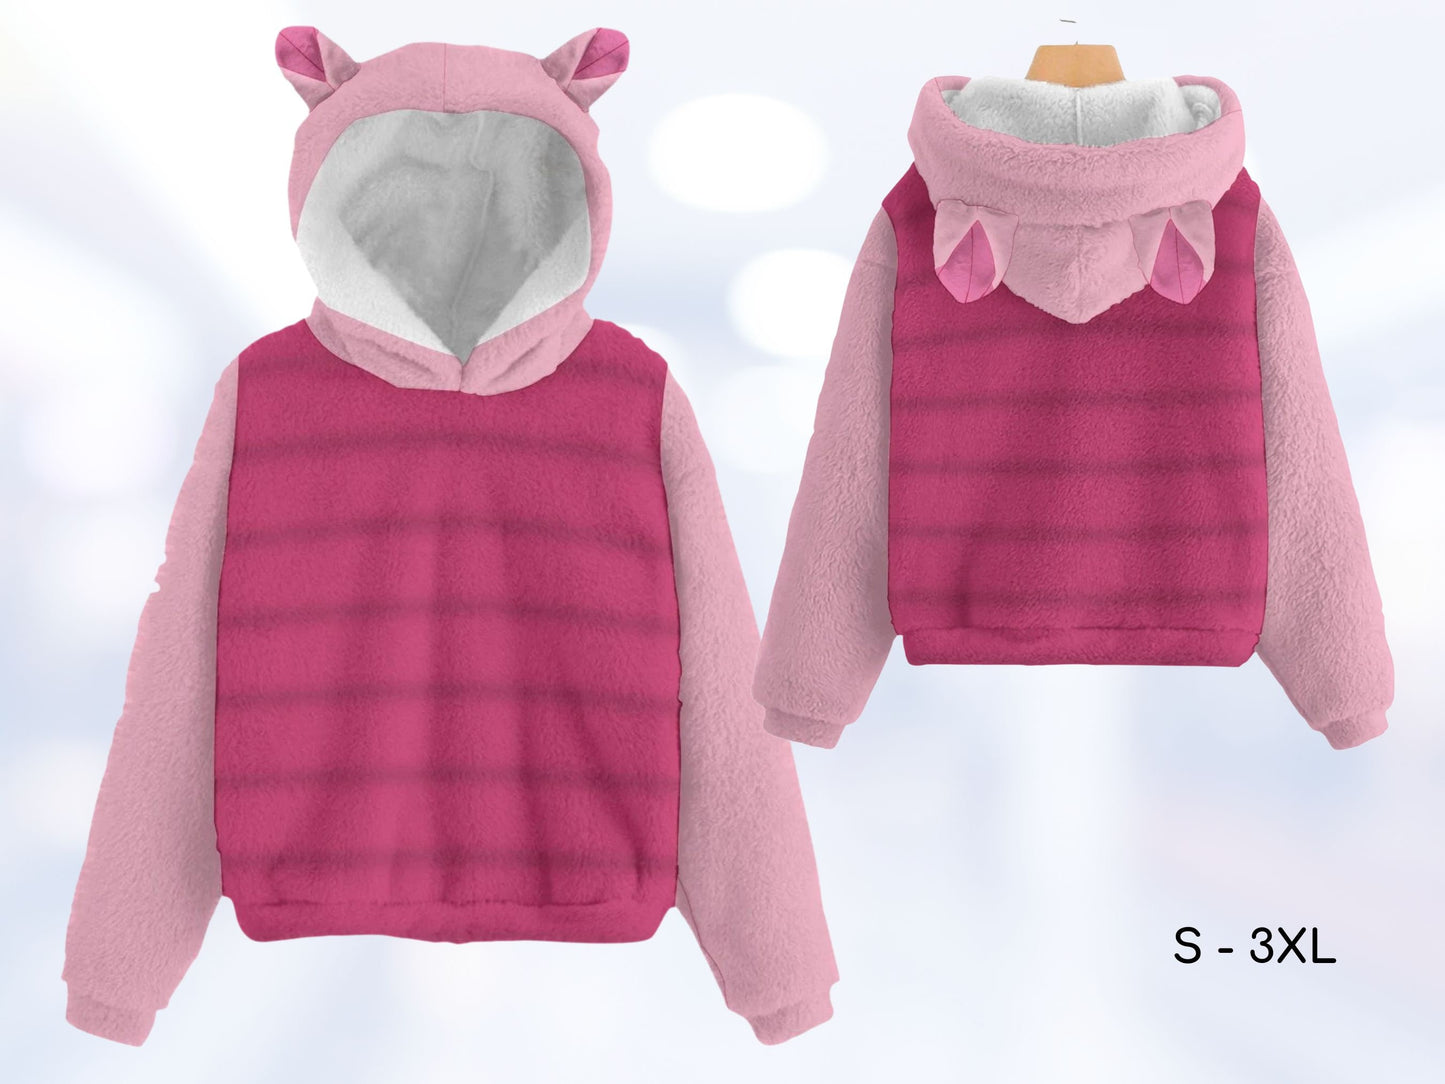 Winnie the Pooh Piglet Set for Kids, Hoodie with Ears, Leggings Sweatpants, Gift for Her, Gift for Him, Halloween Costumes, Cosplay, Fall